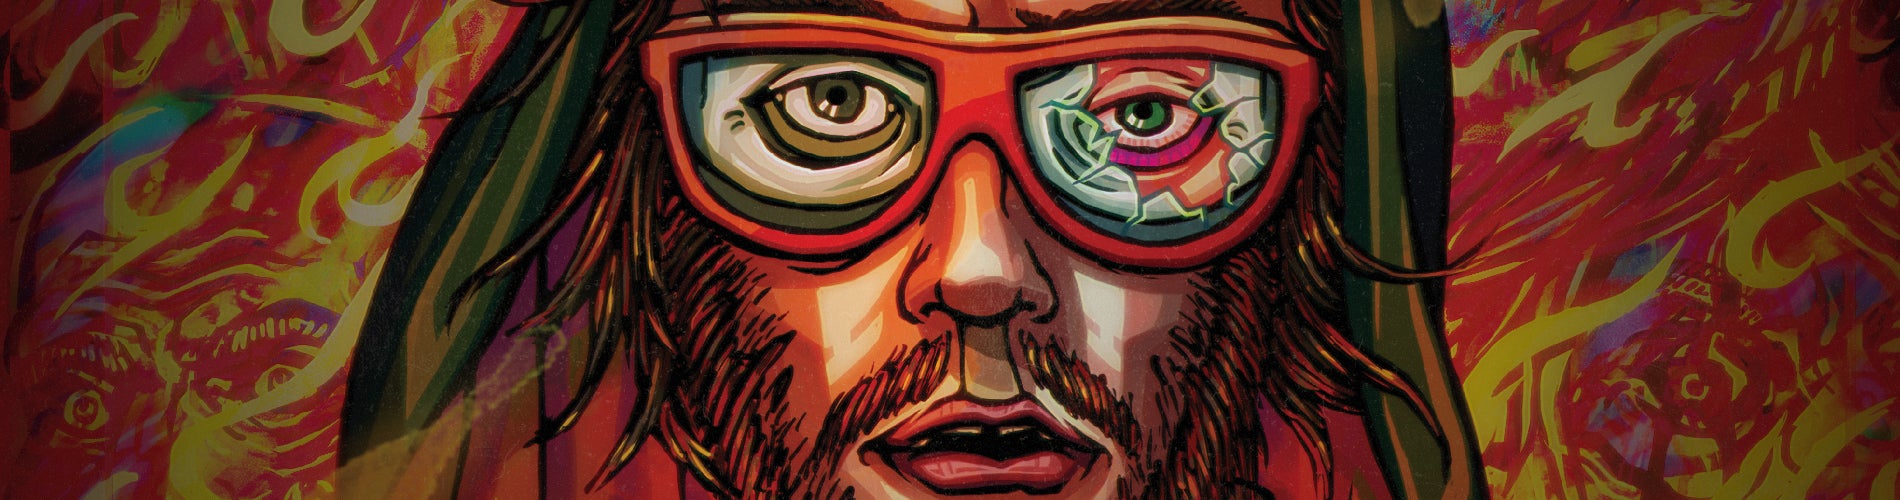 Image for Hotline Miami 2: Wrong Number delayed into late 2014, possibly 2015